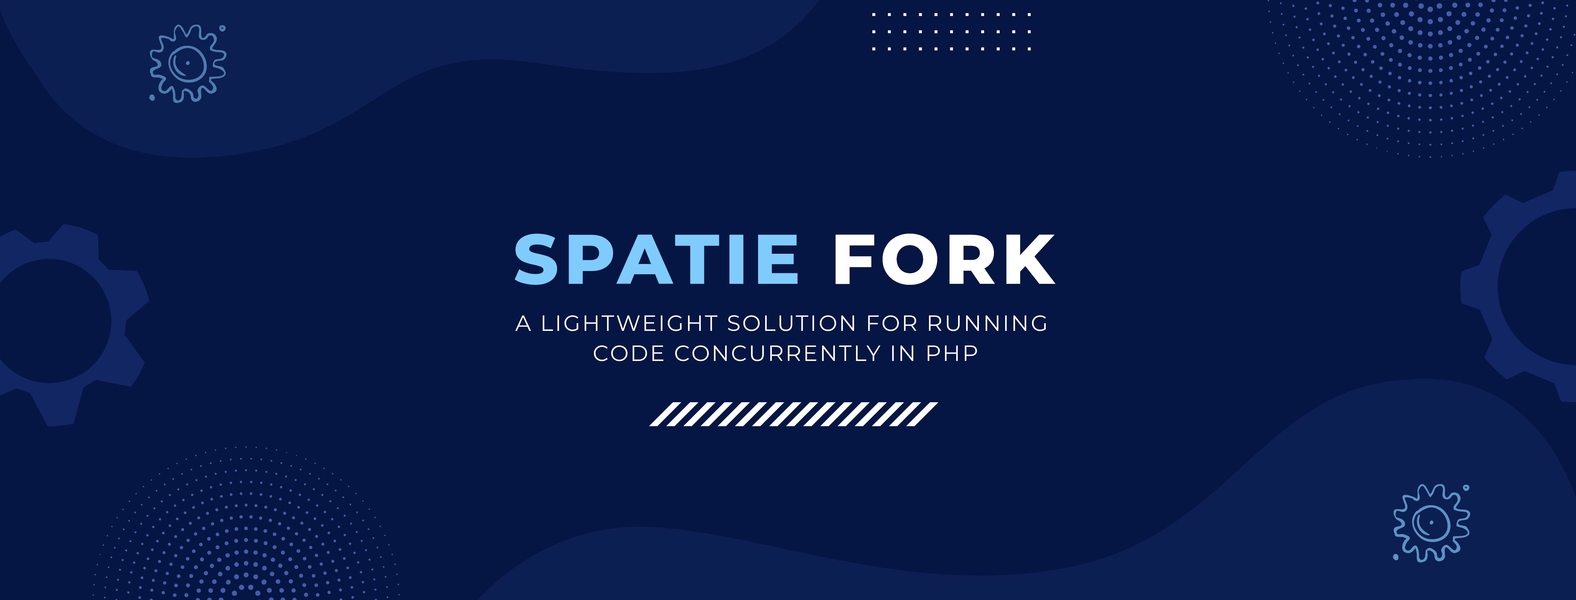 A lightweight solution for running code concurrently in PHP